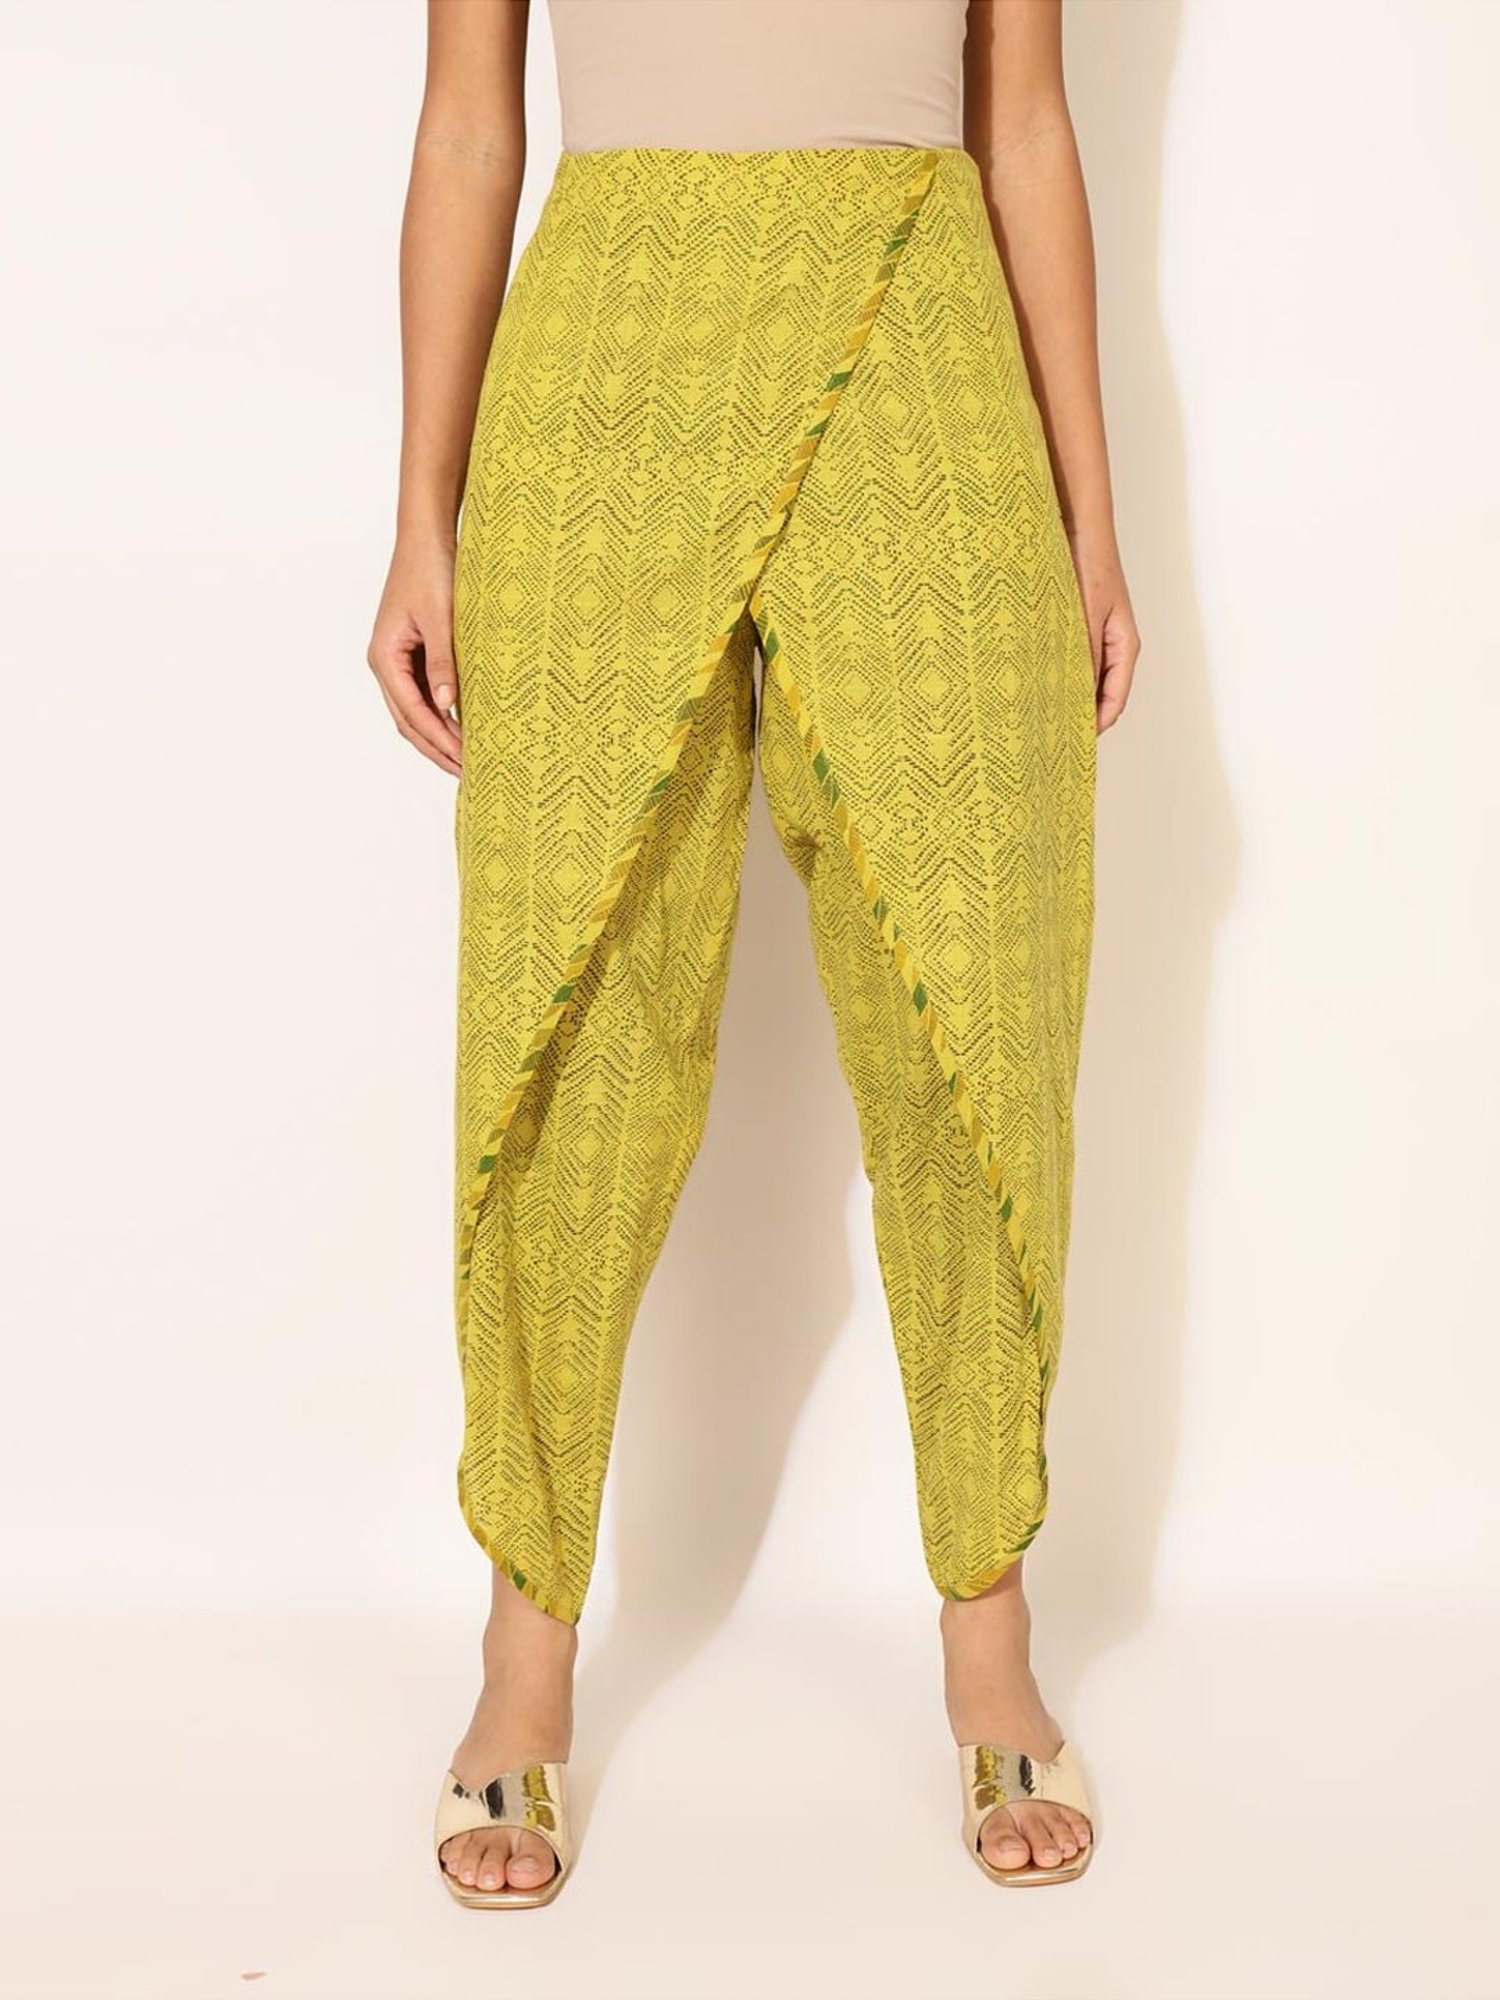 Shop Yellow Dhoti Pants for Women Online from India's Luxury Designers 2024